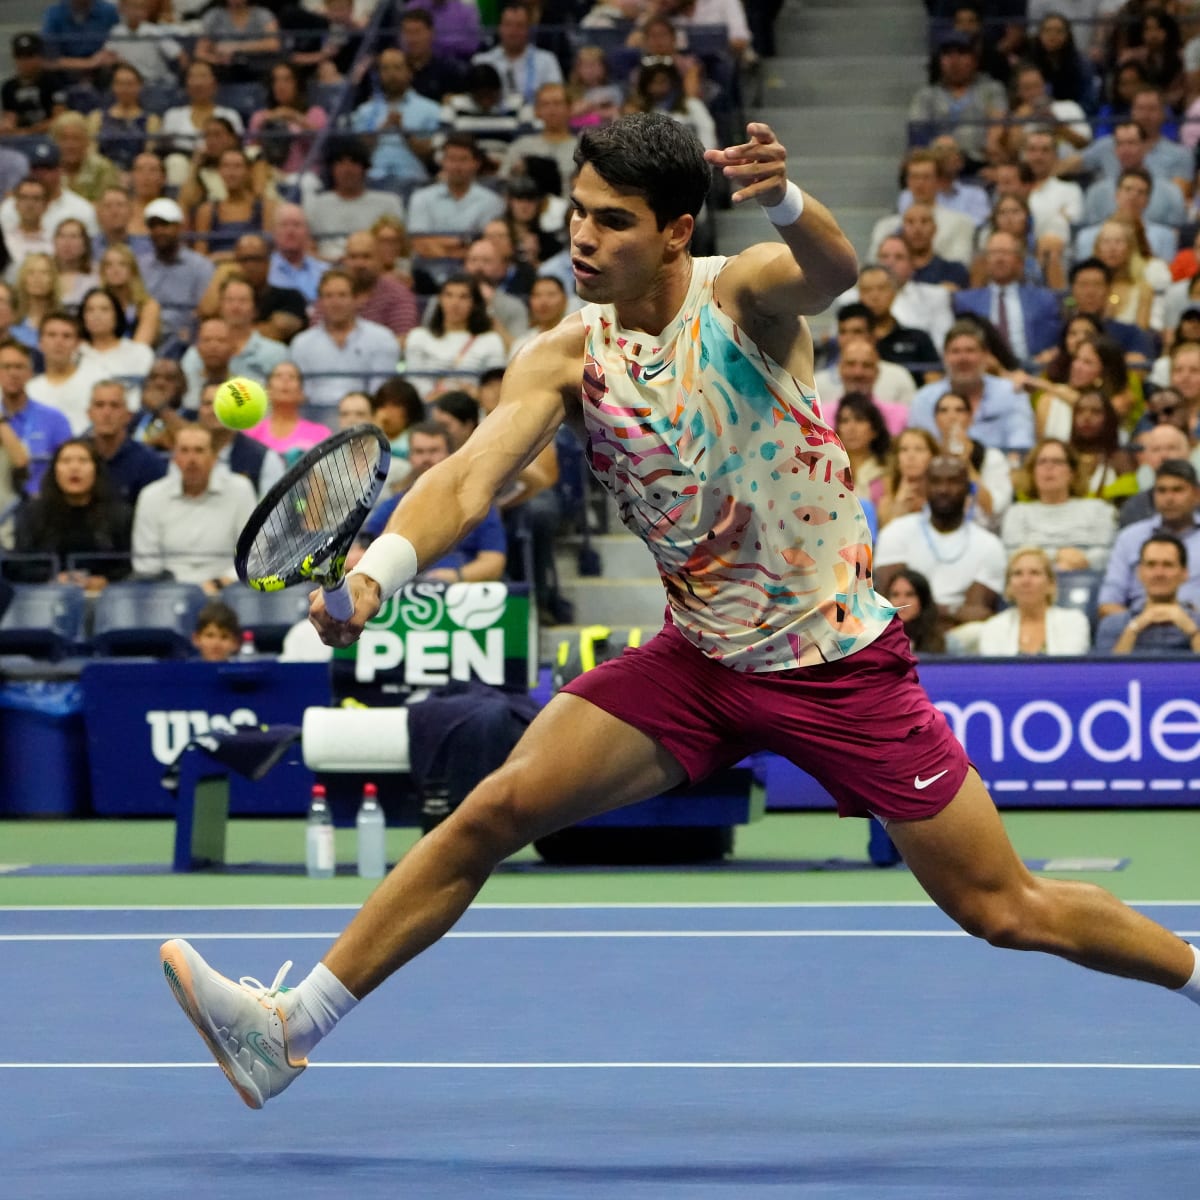 US Open Tennis Second Round Free Live Stream Online, Channel - How to Watch and Stream Major League and College Sports